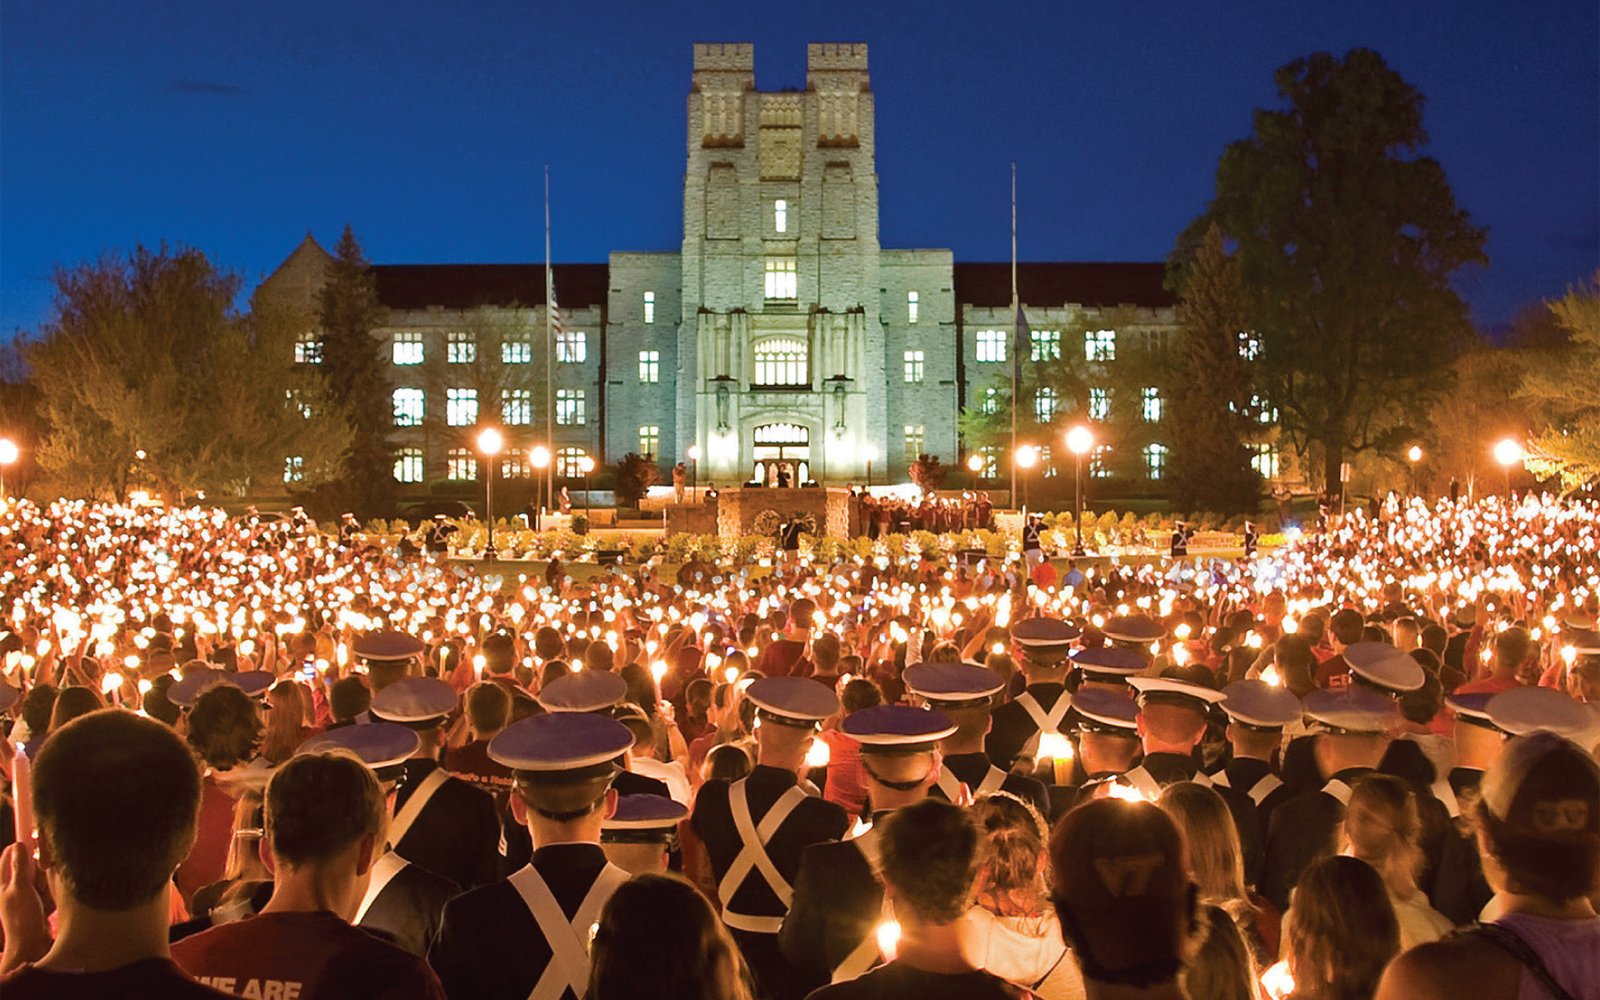 Virginia Tech prepares for 10th anniversary of deadly shootings | WTOP